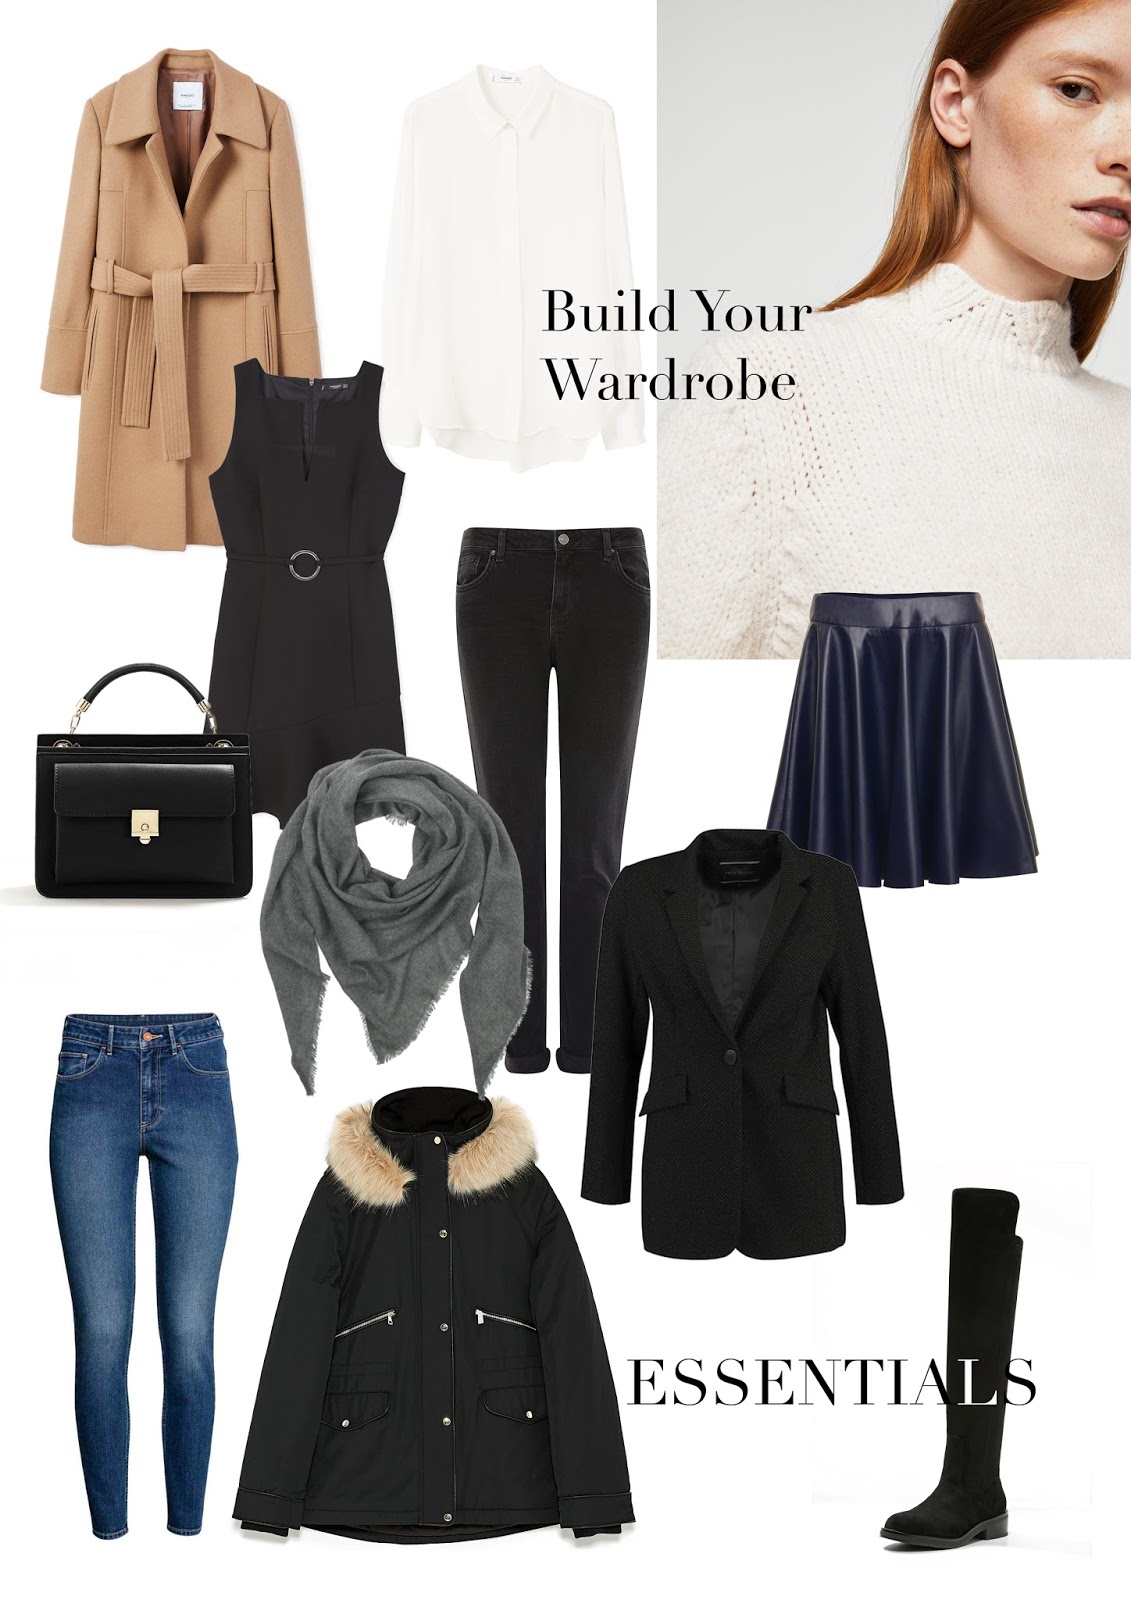 12 ITEMS THAT EVER WOMAN SHOULD HAVE IN THEIR WARDROBE - WINTER SEASON | MAKES IT SIMPLE 